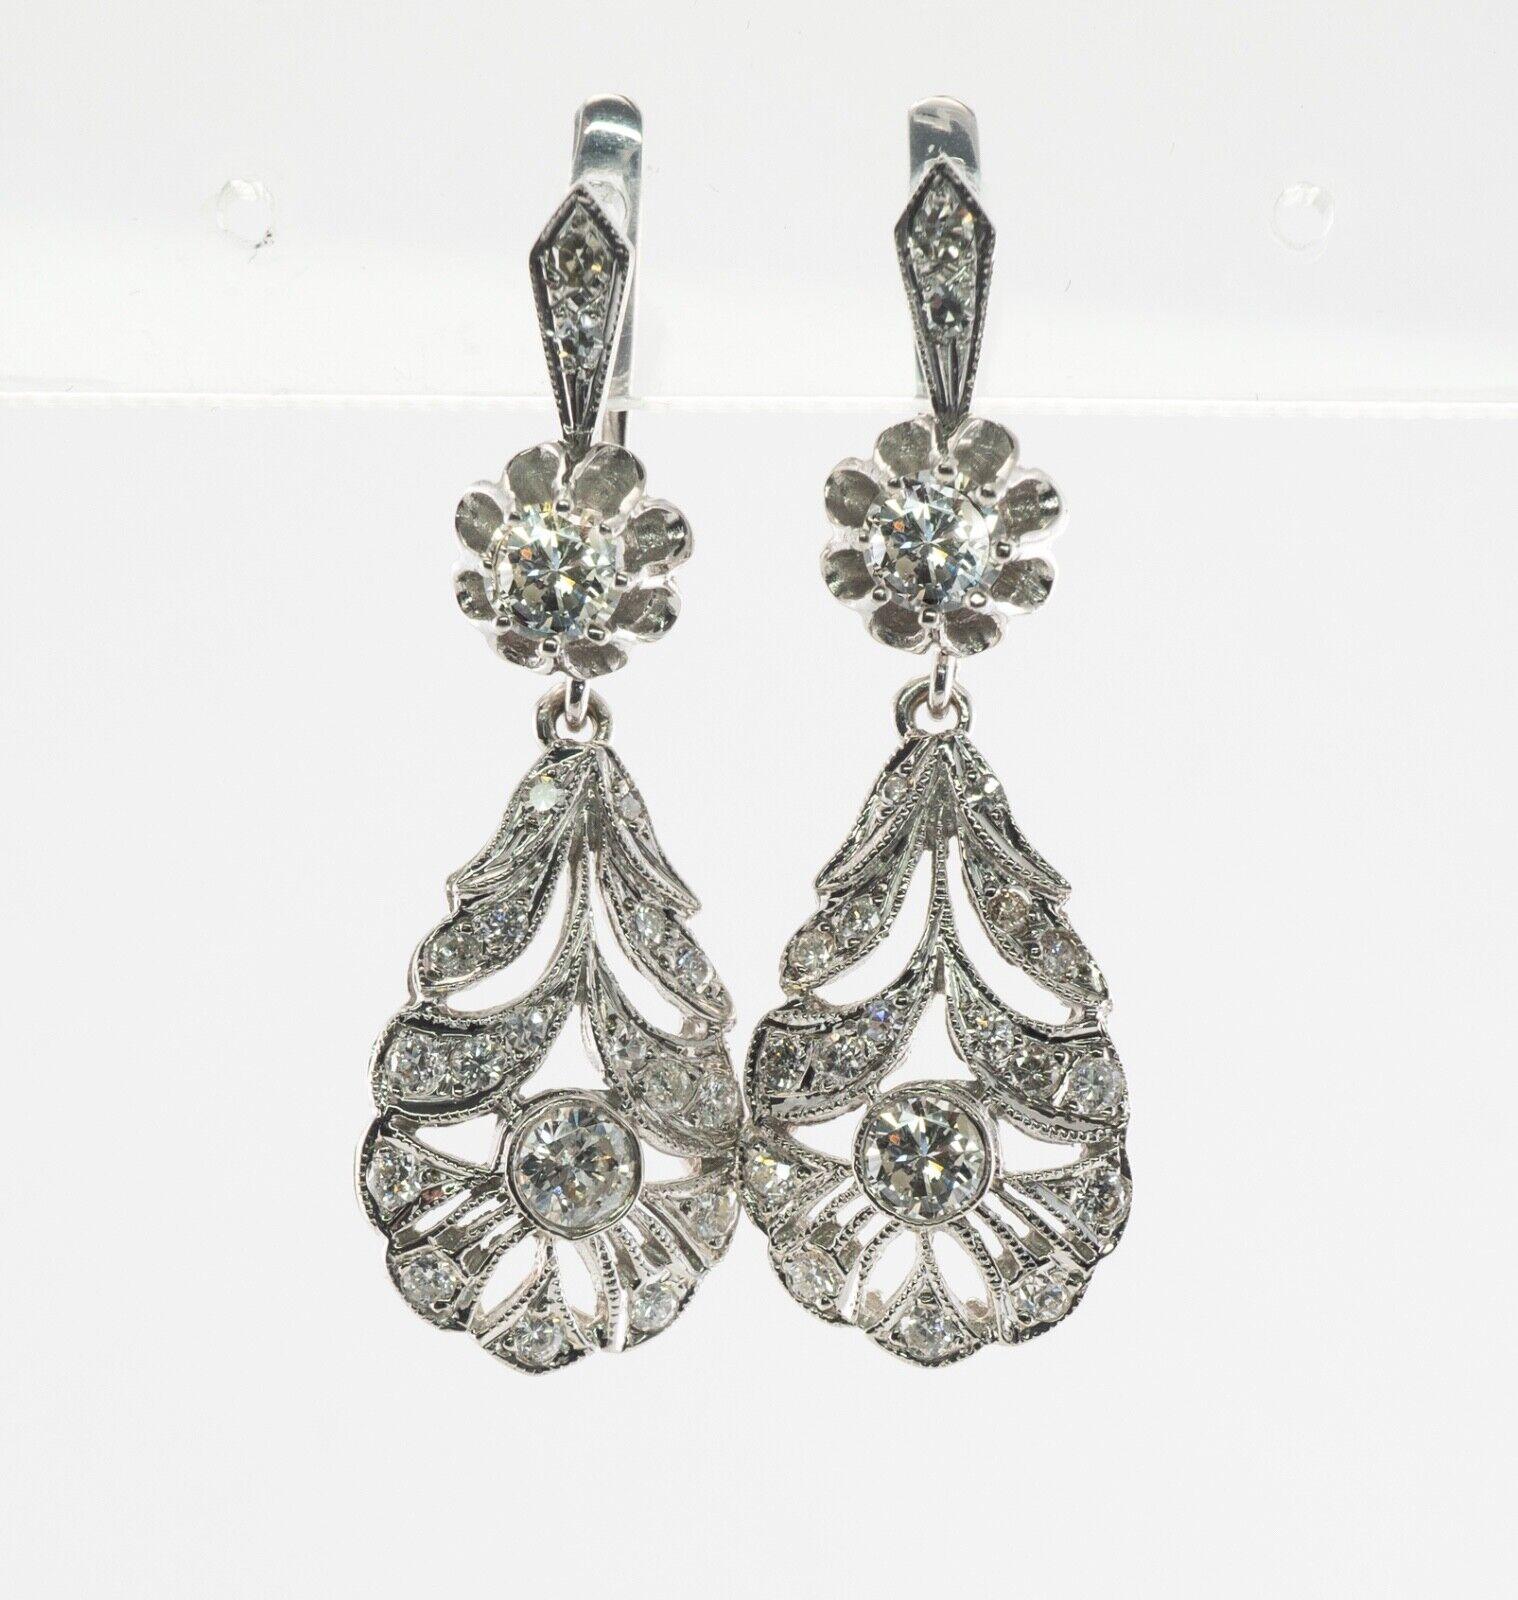 Diamond Earrings Flower Vintage 14K White Gold Dangle 1.66 TDW

These gorgeous vintage earrings are crafted in solid 14K White Gold and set with natural diamonds. The buttercup setting on the top holds .25 carat diamond. The bezel-set diamond on the